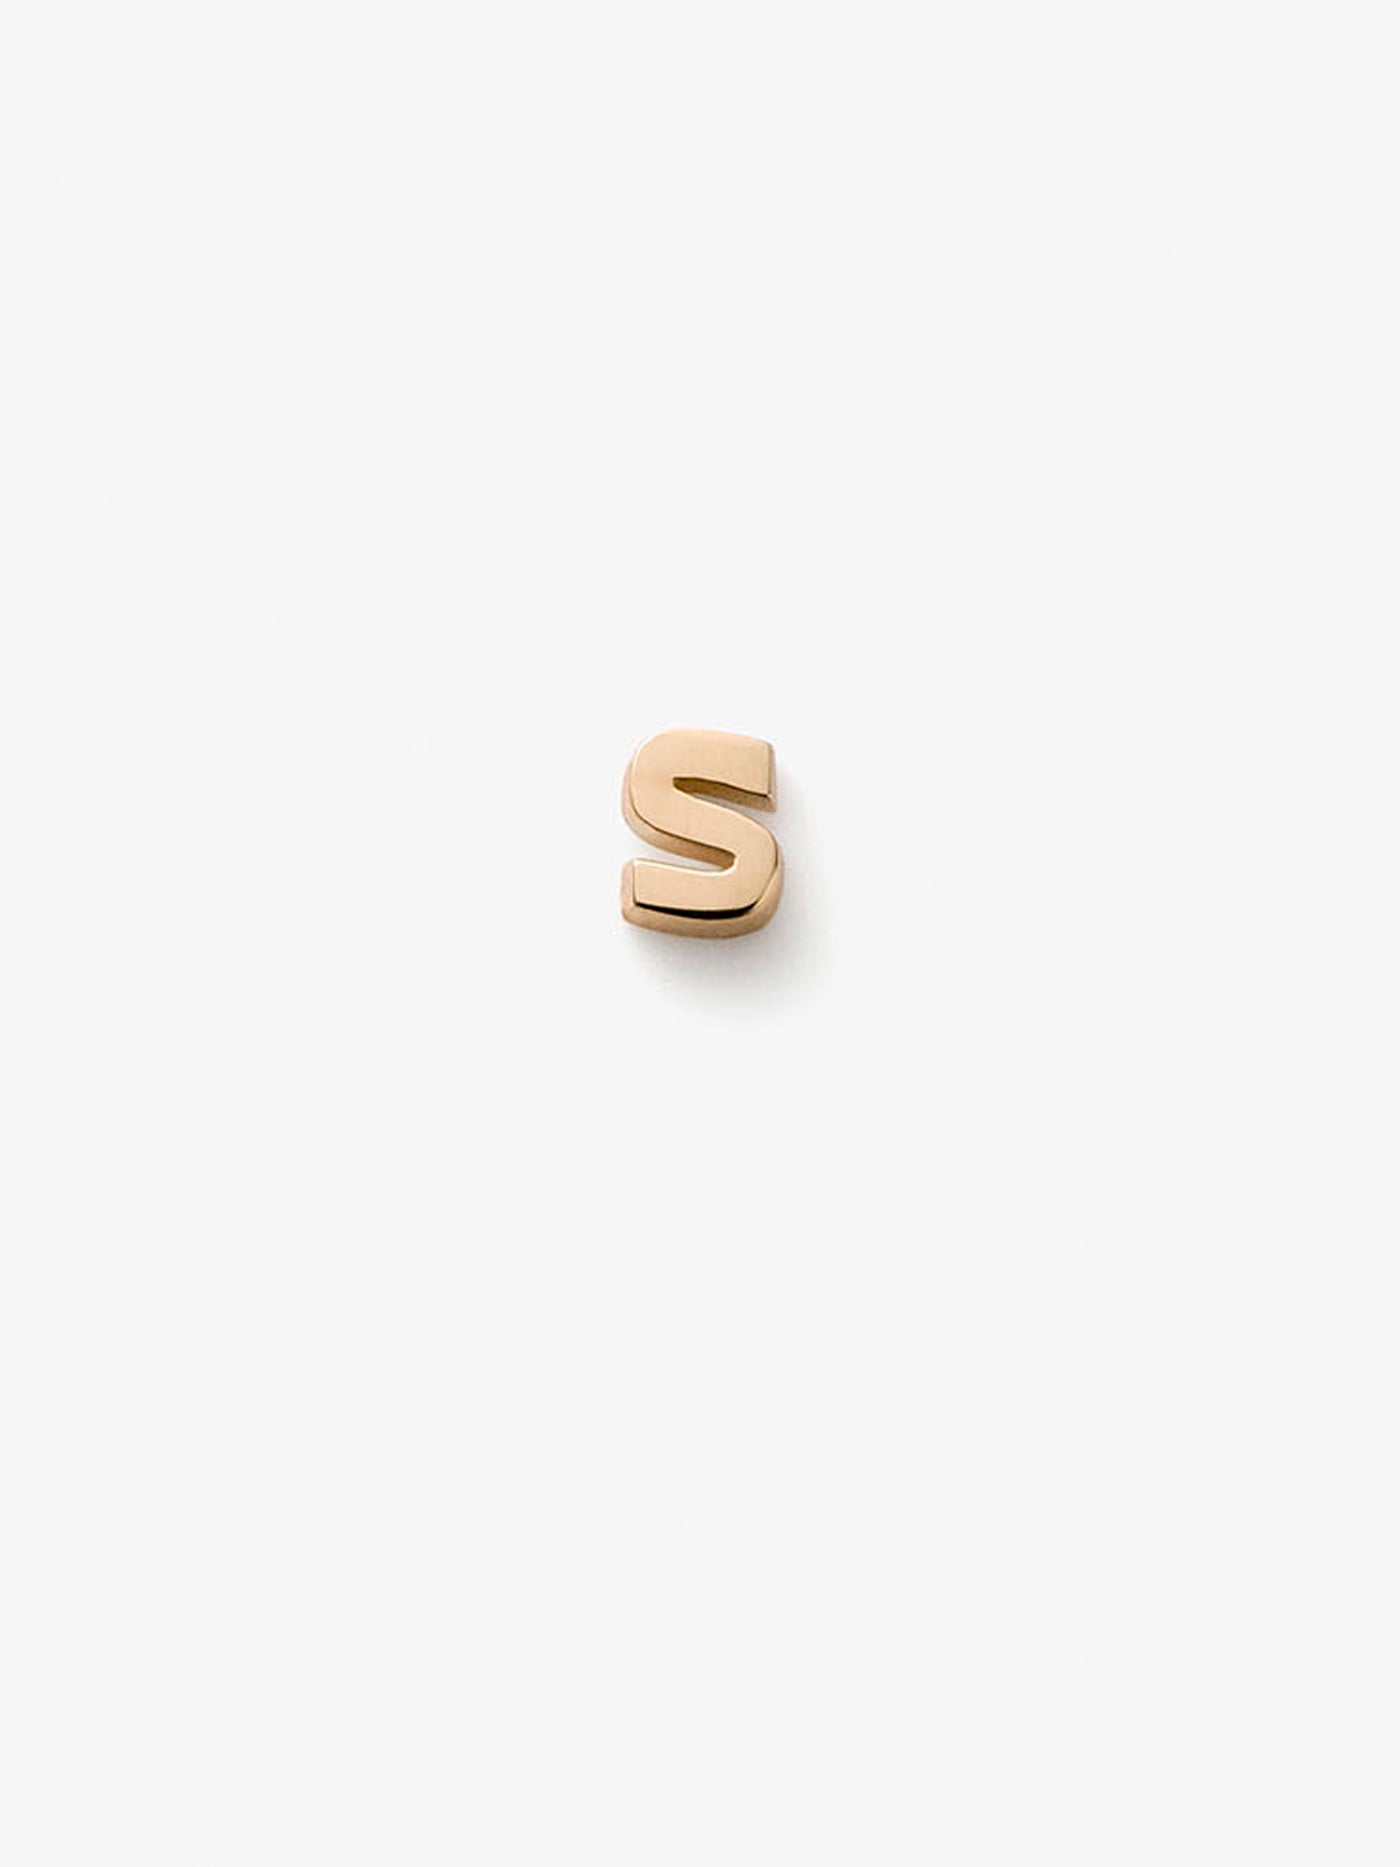 One Letter S in 18k Gold